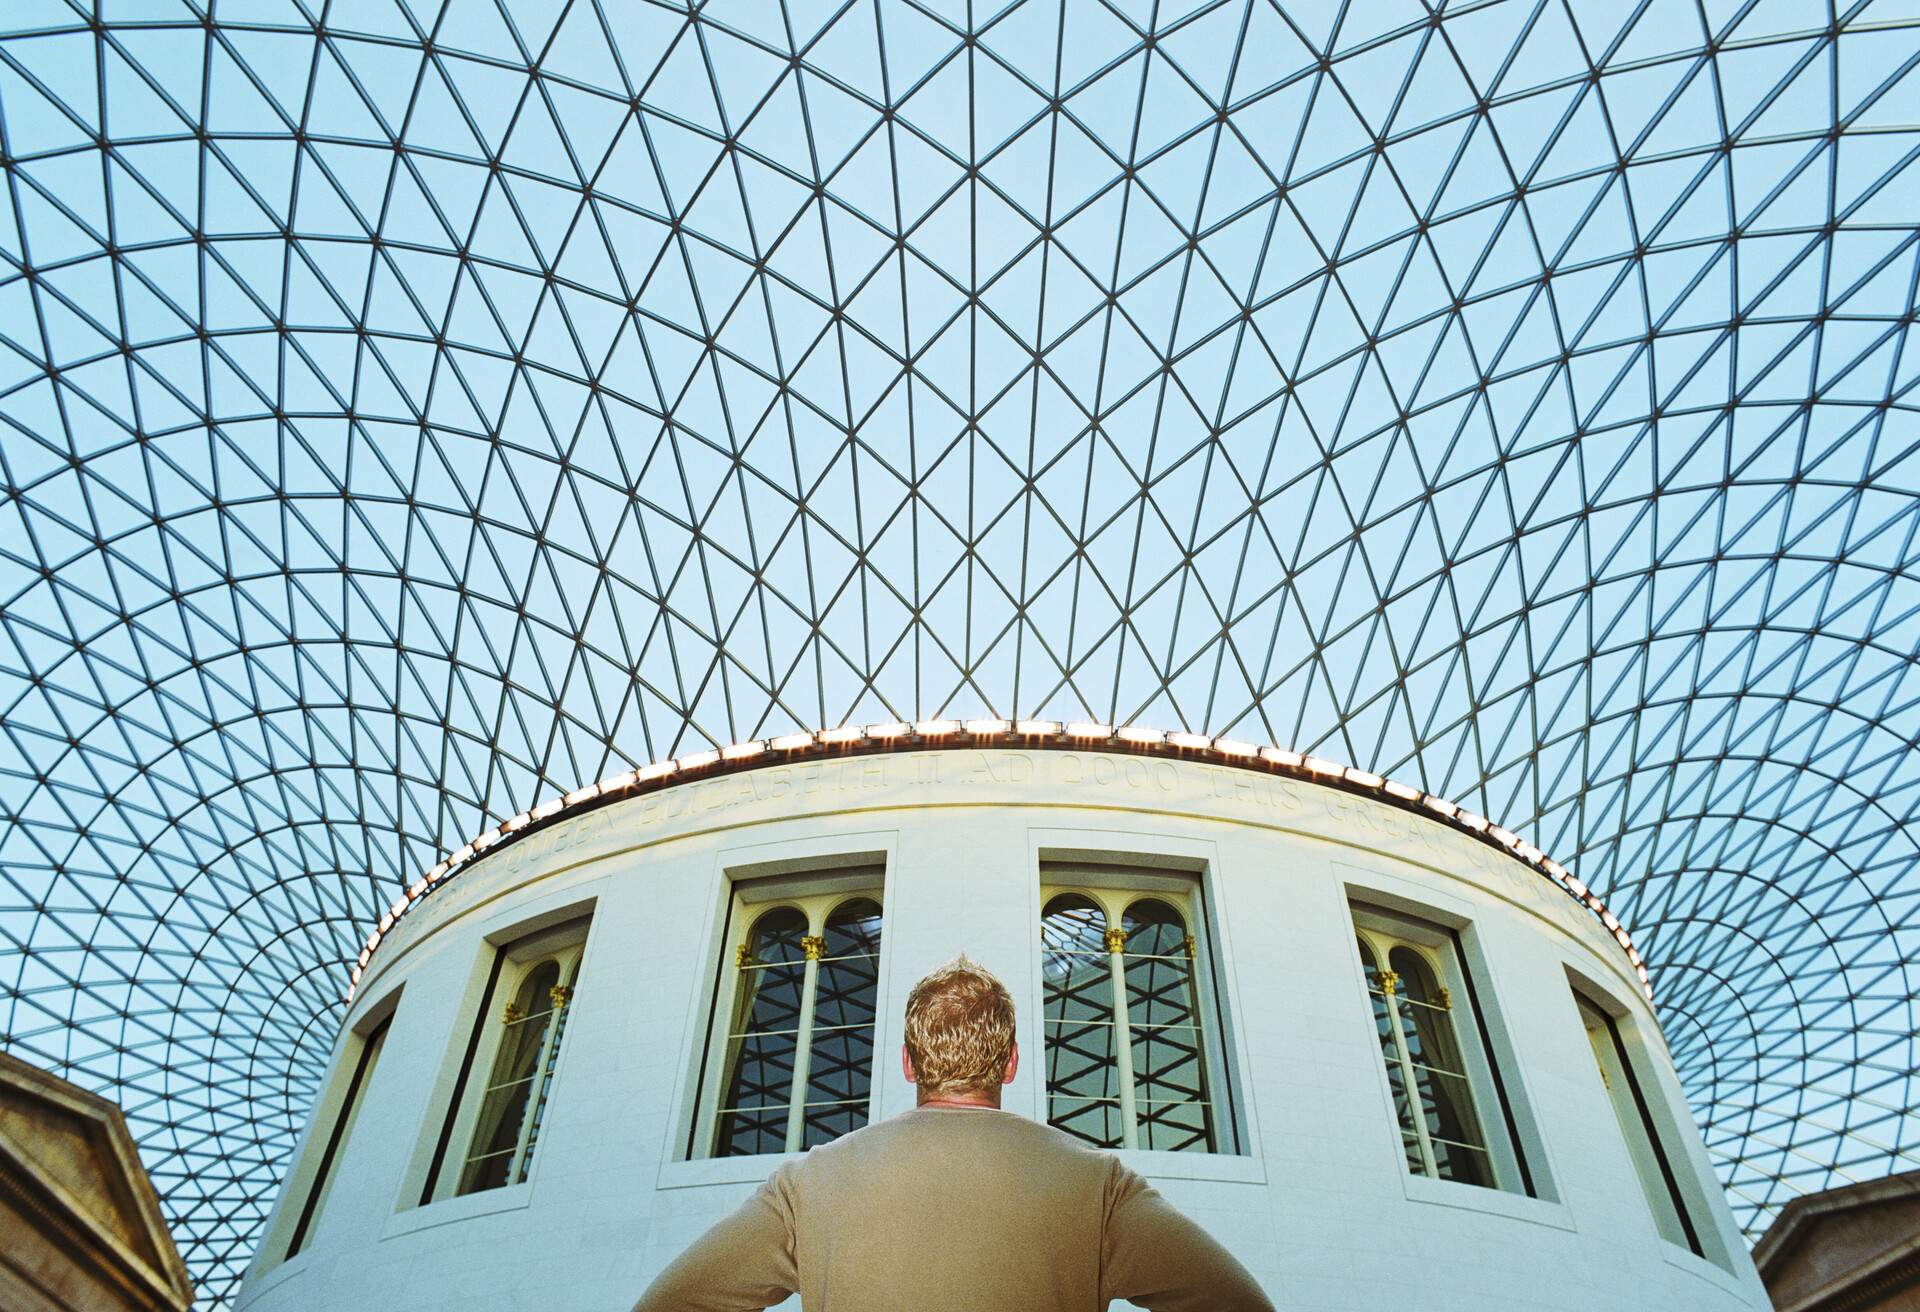 The Great Court, The British Museum, London, England